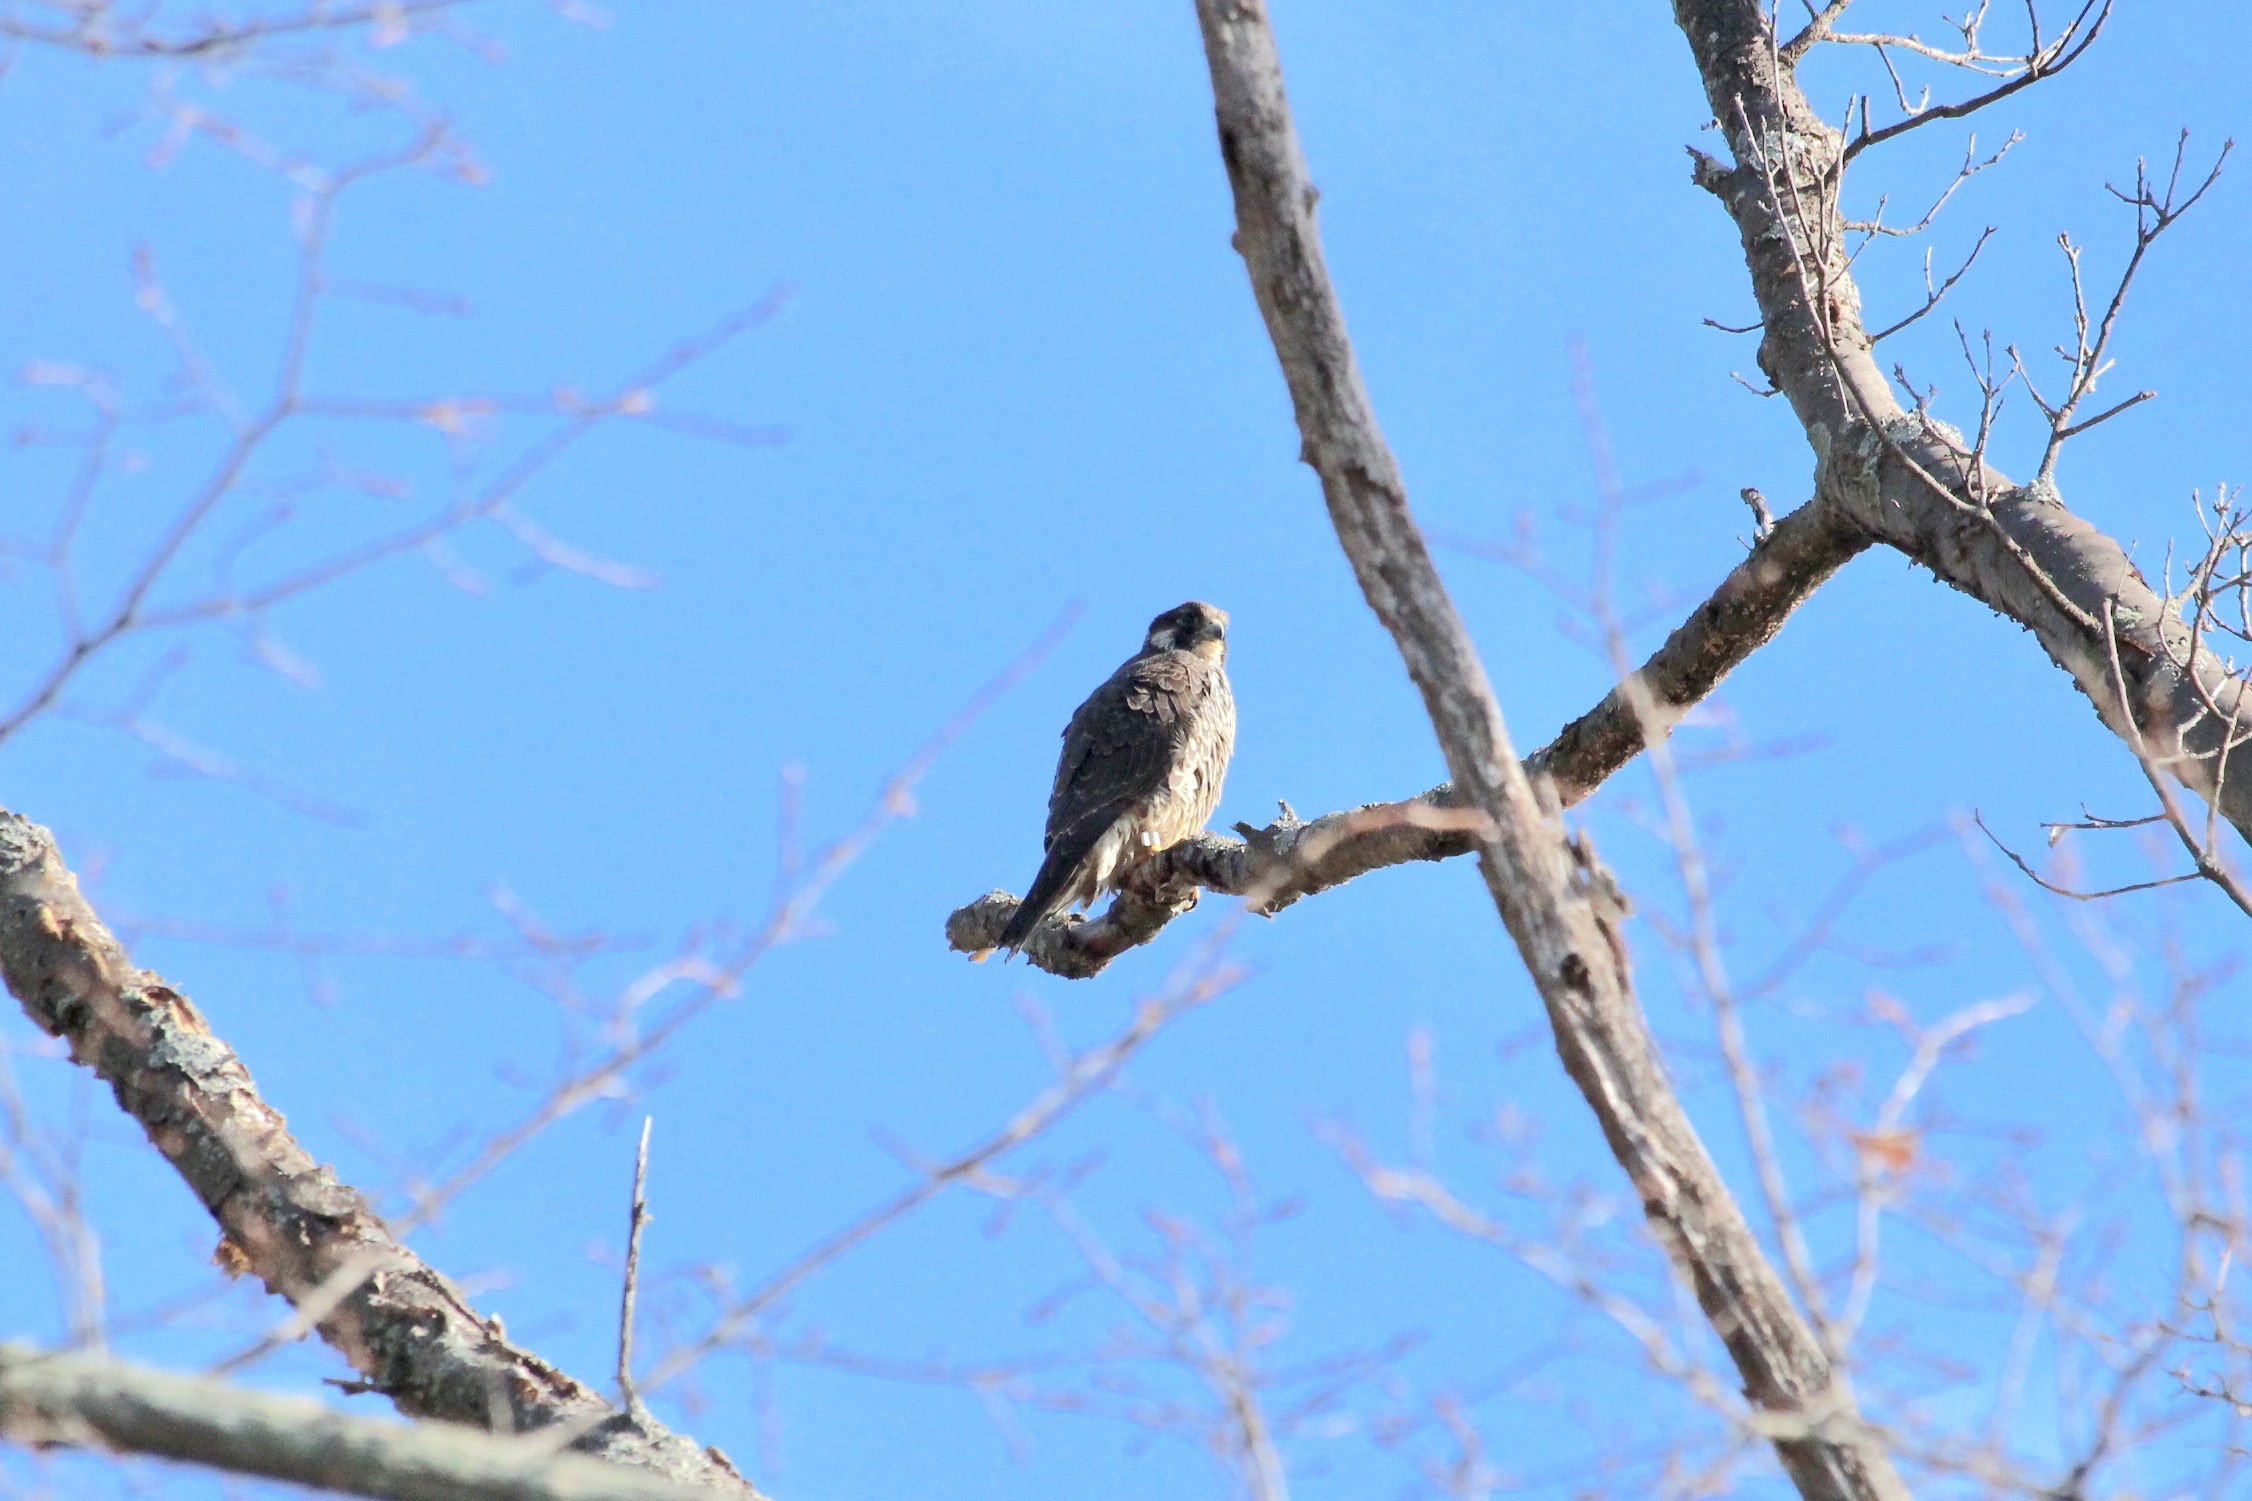 A juvenile peregrine falcon in Massachusetts. Photo by Dyana, Flickr, Creative Commons